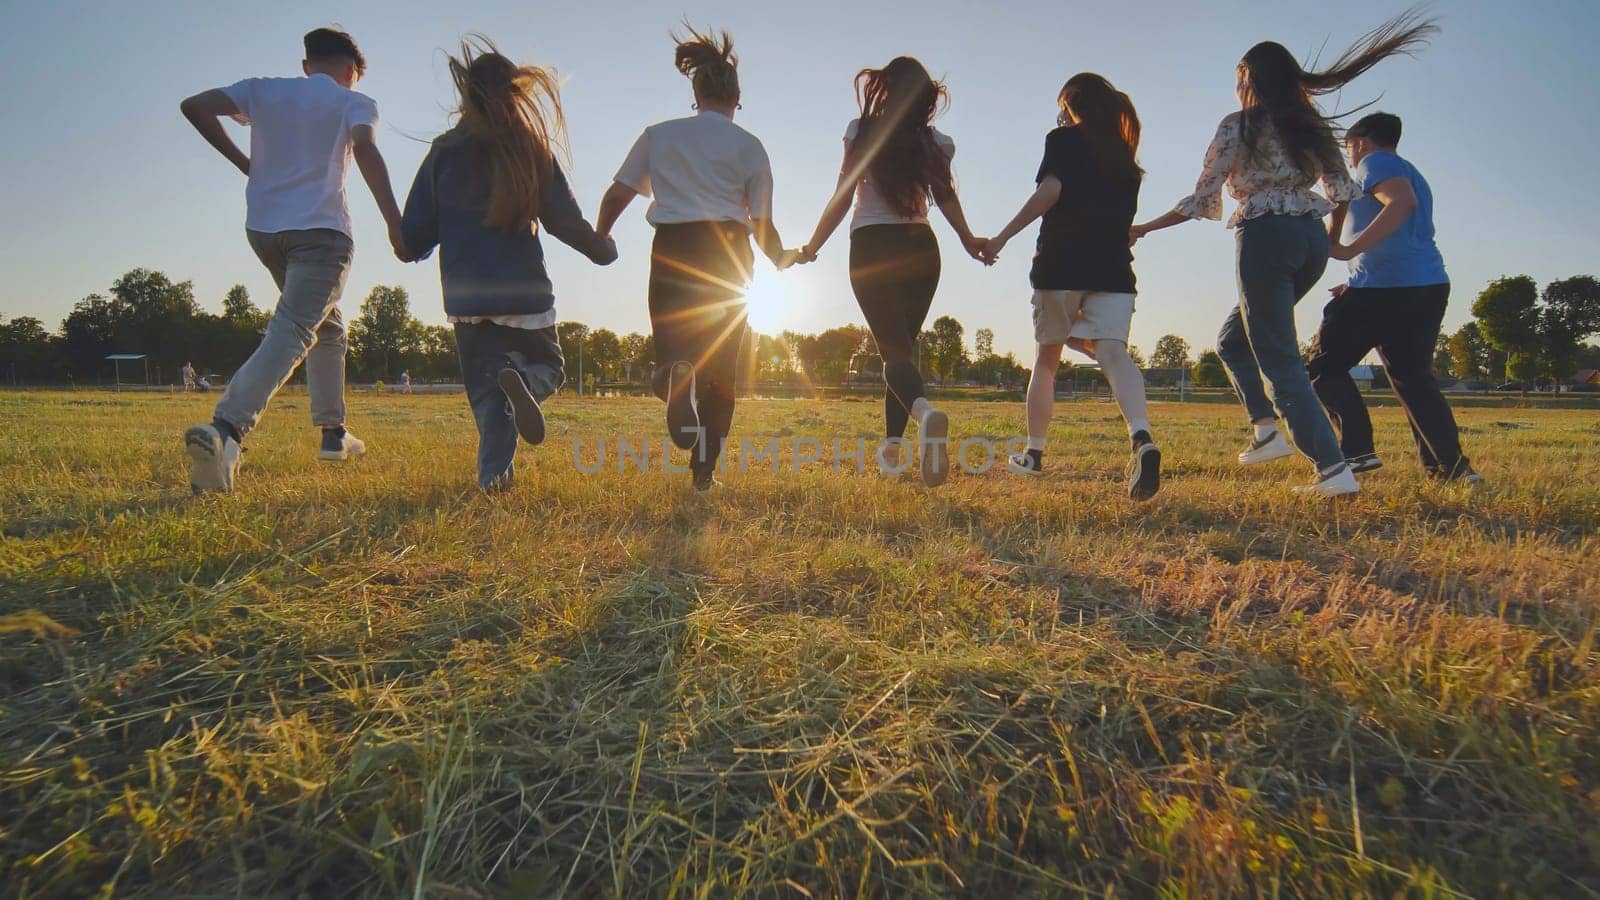 School friends running across the field holding hands at sunset. by DovidPro